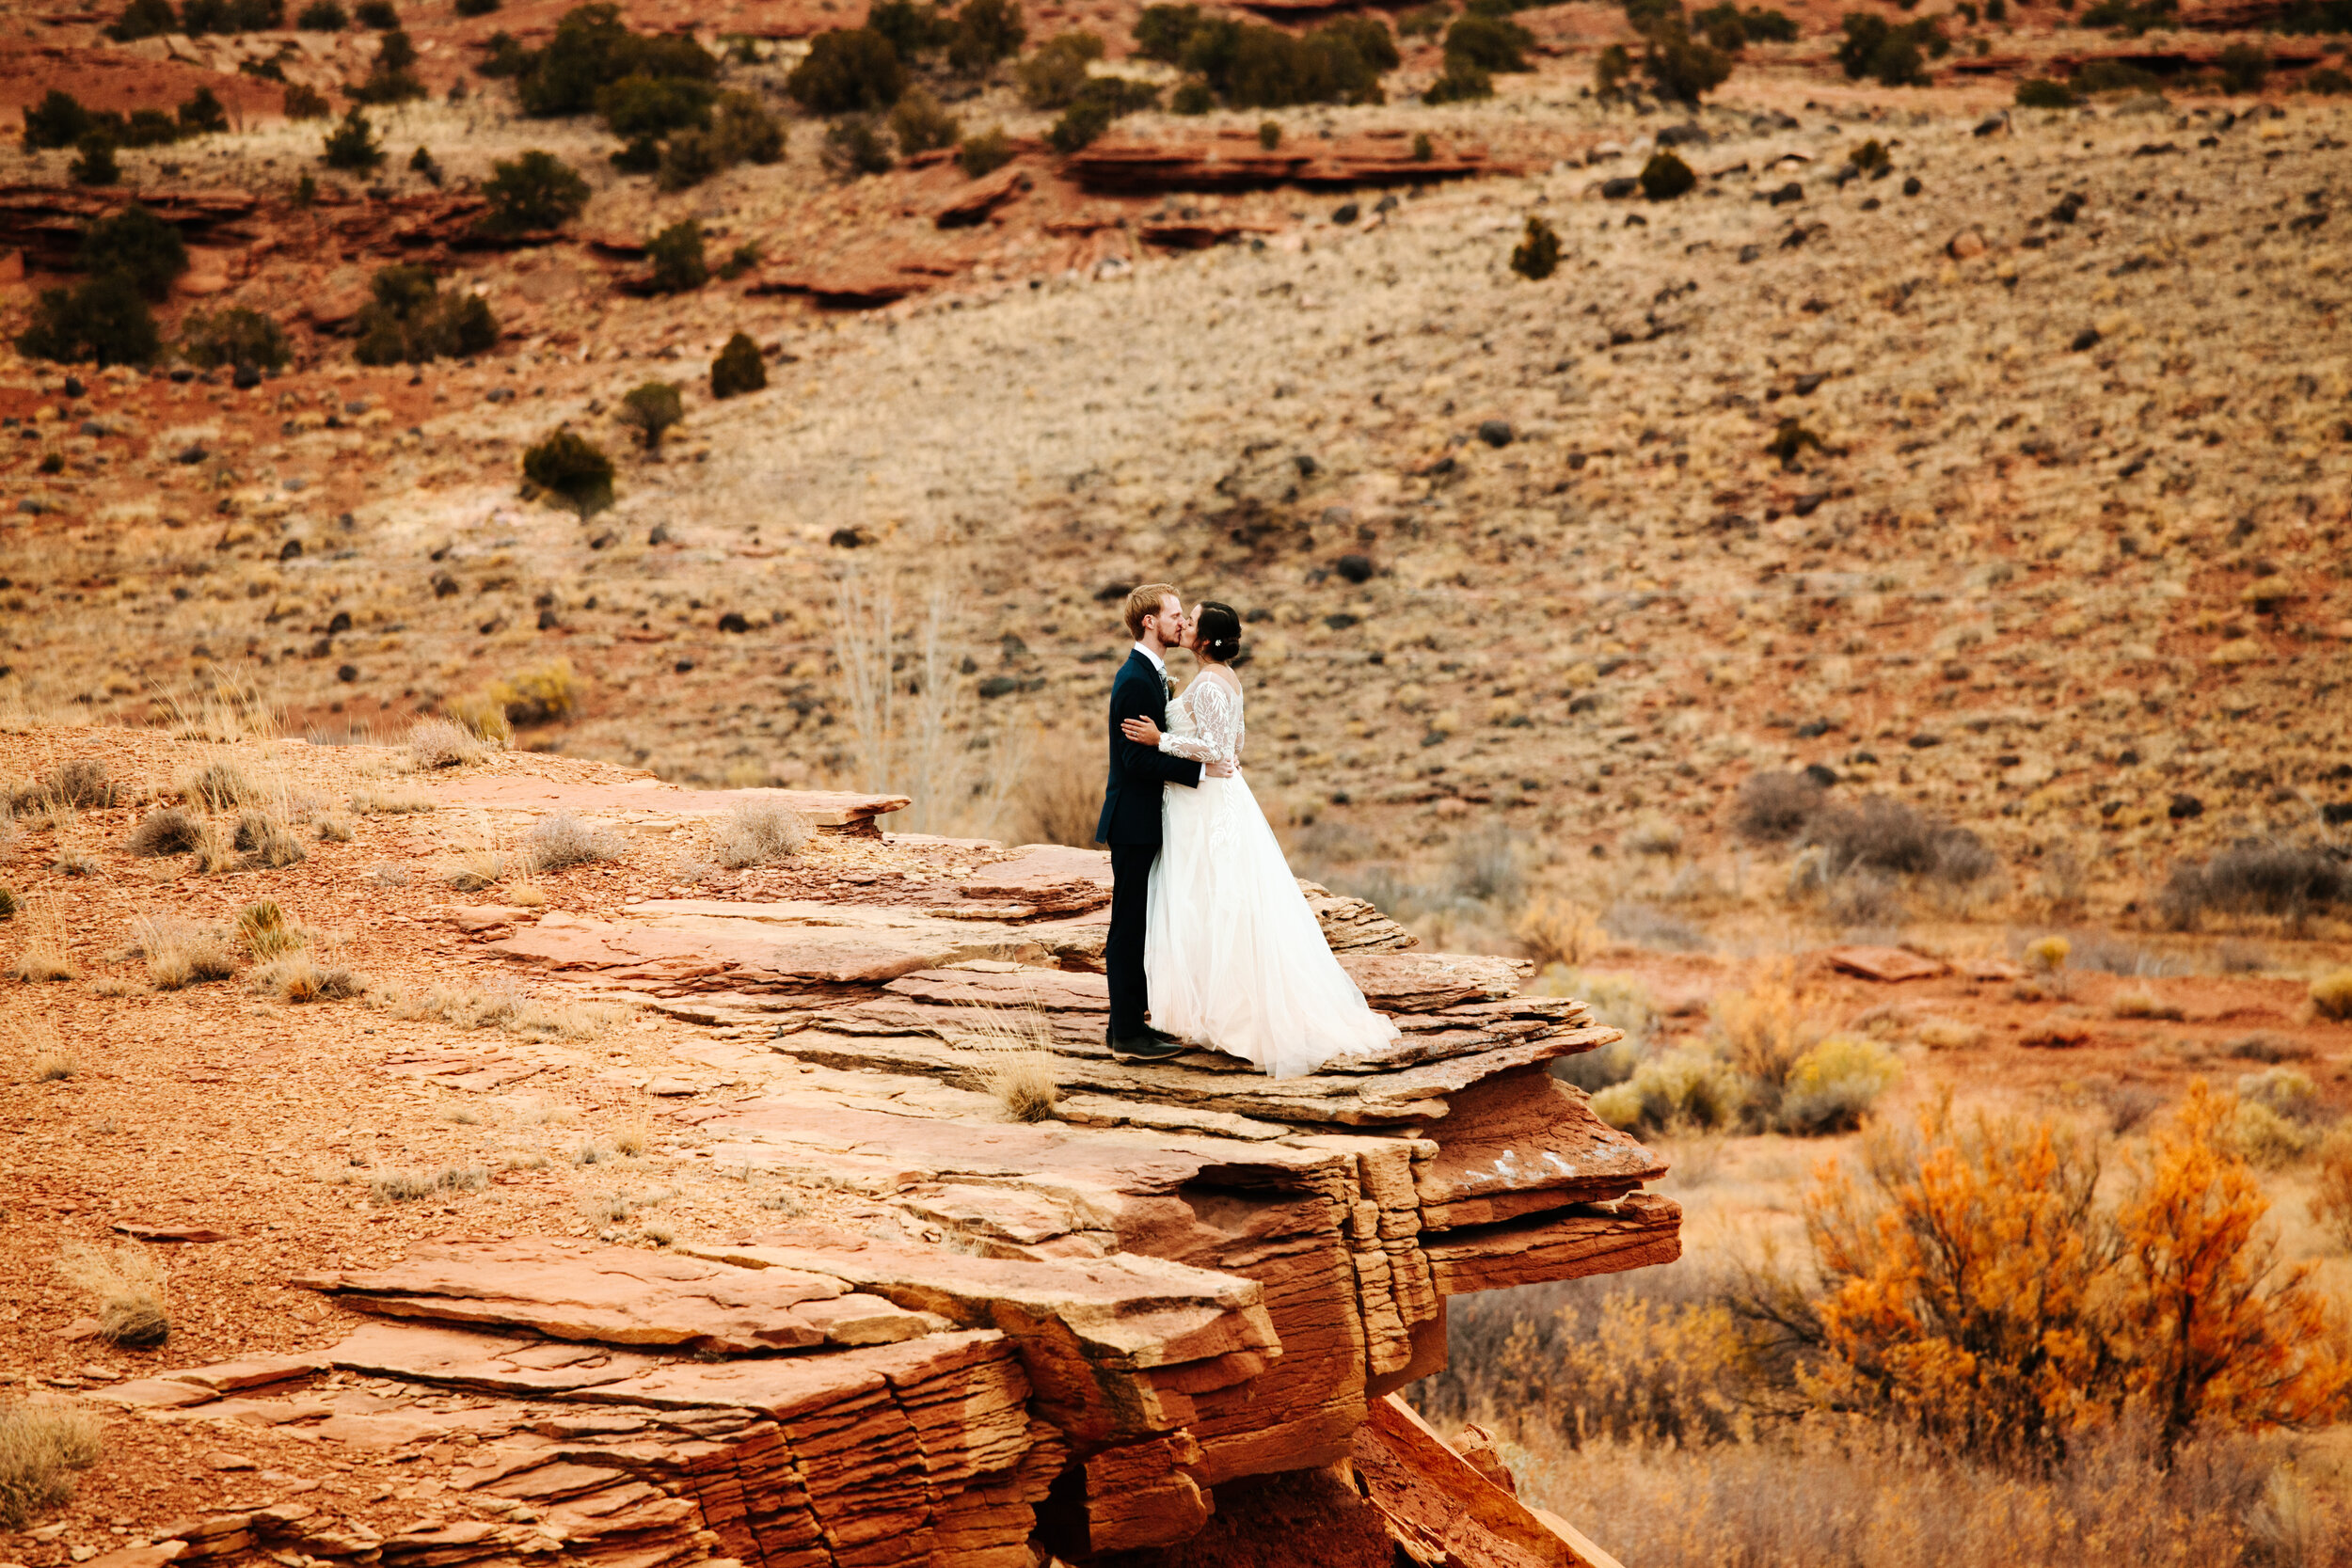 Couple kissing at their fall wedding in Moab, Utah.